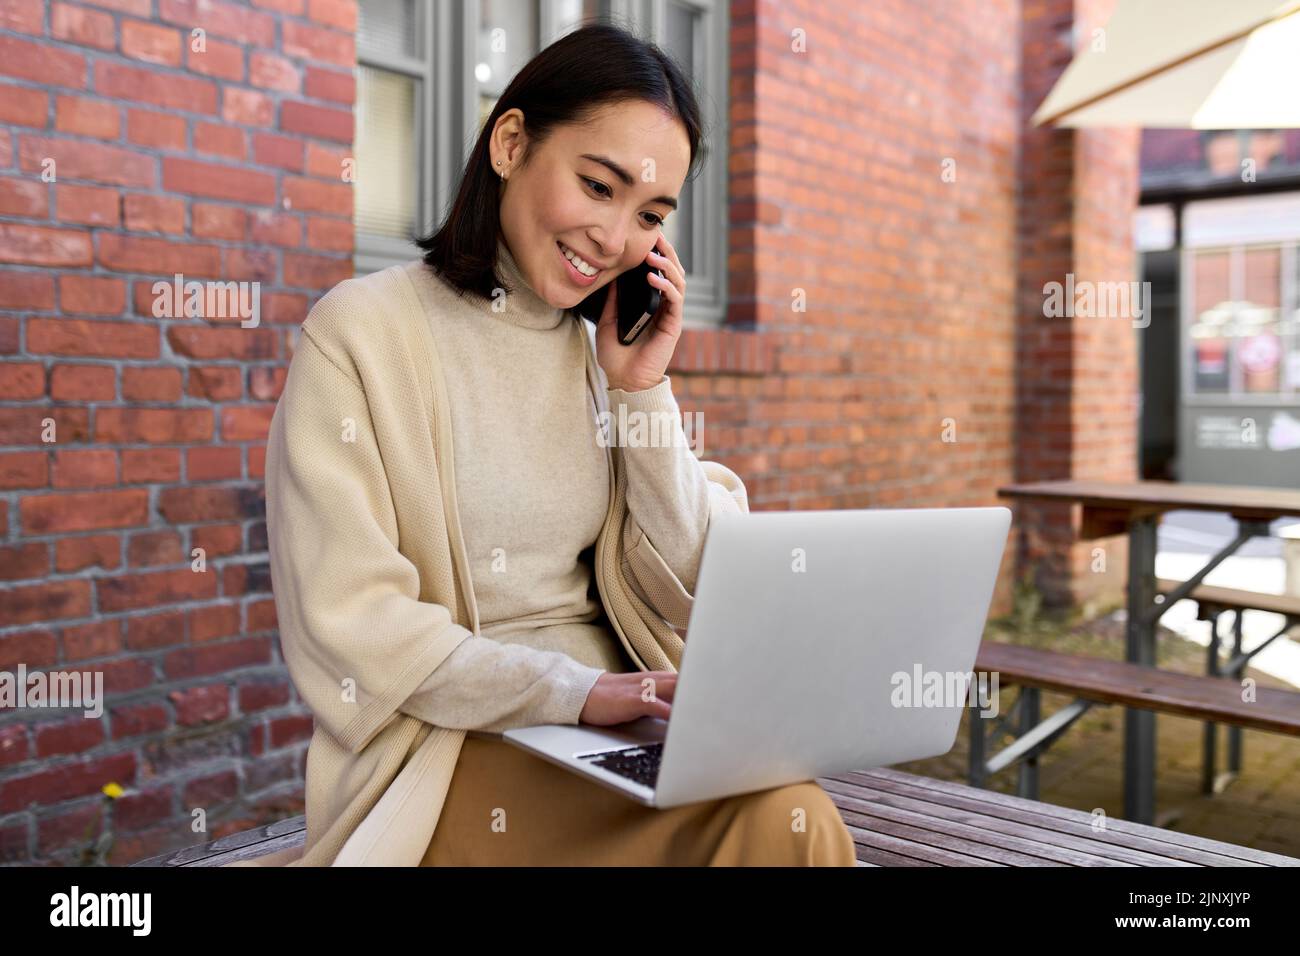 Smiling young Asian business woman talking on cellphone using laptop outdoors. Stock Photo